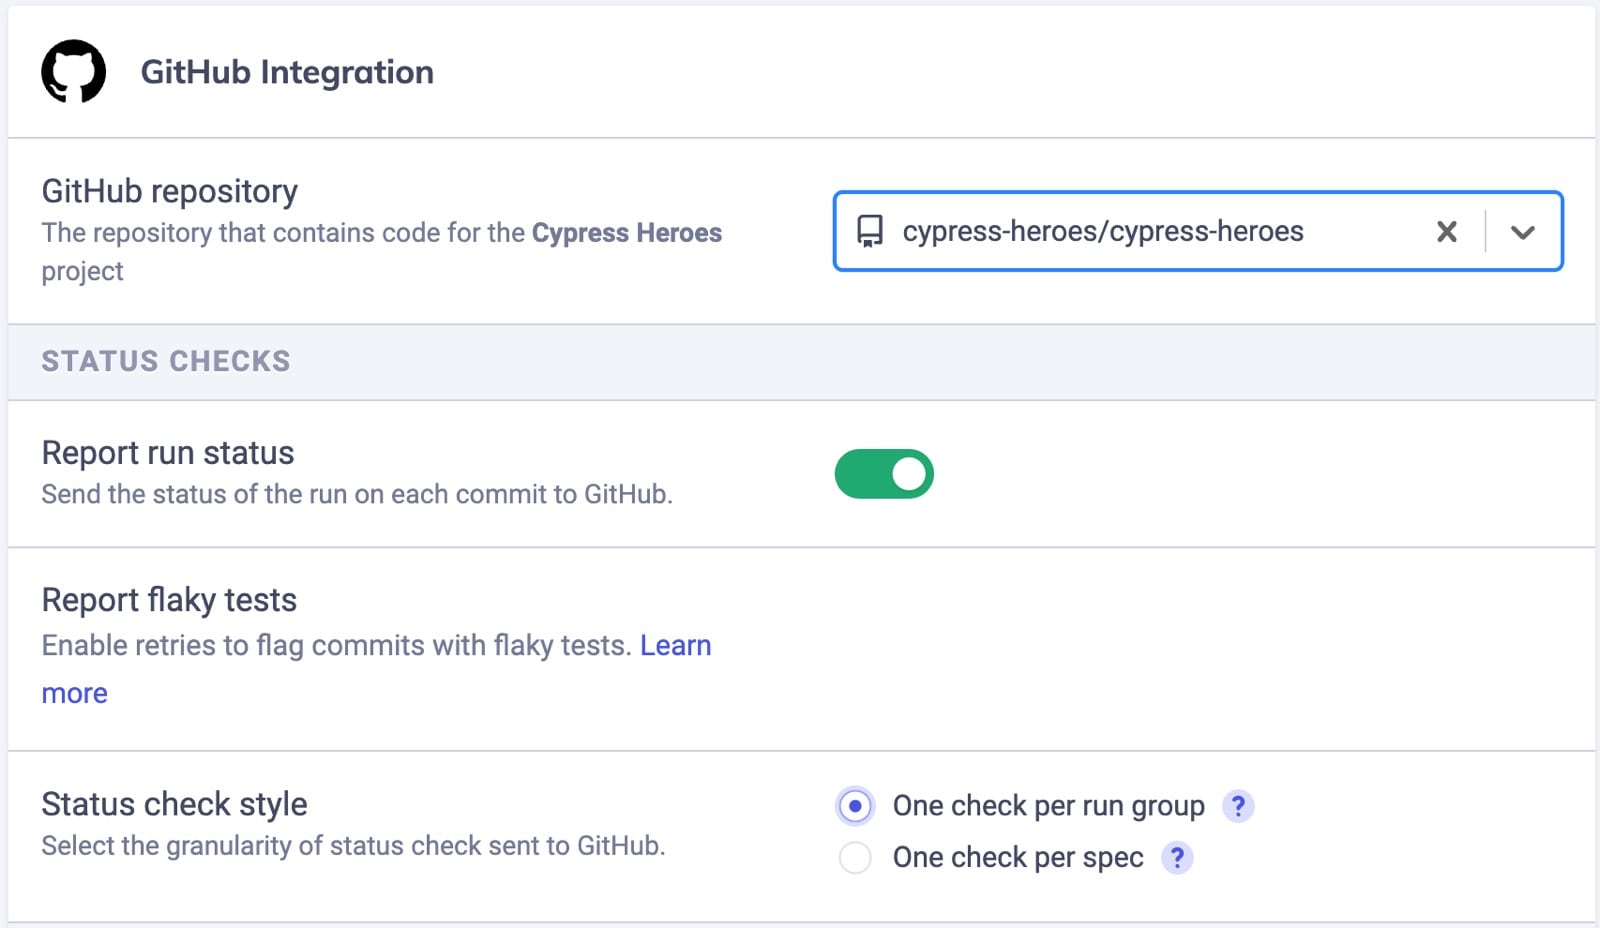 GitHub integration enabled for Cypress project